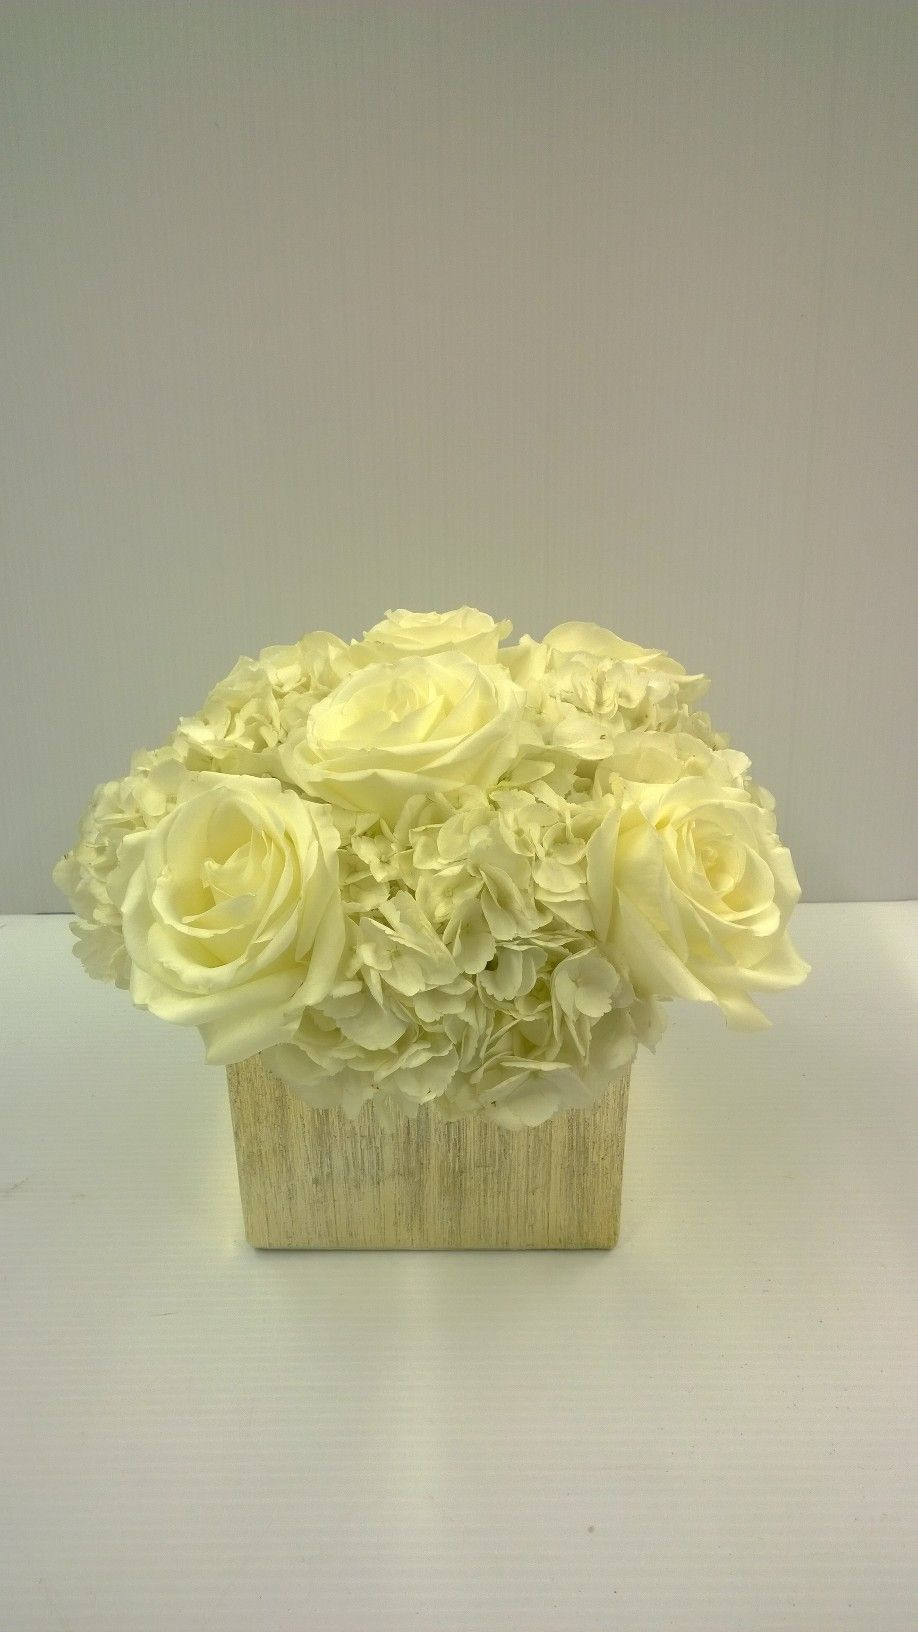 14 Fabulous 6 Cube Vase 2024 free download 6 cube vase of gold vase centerpiece gold ceramic cube with 3 white hydrangeas throughout gold vase centerpiece gold ceramic cube with 3 white hydrangeas and 6 white open roses